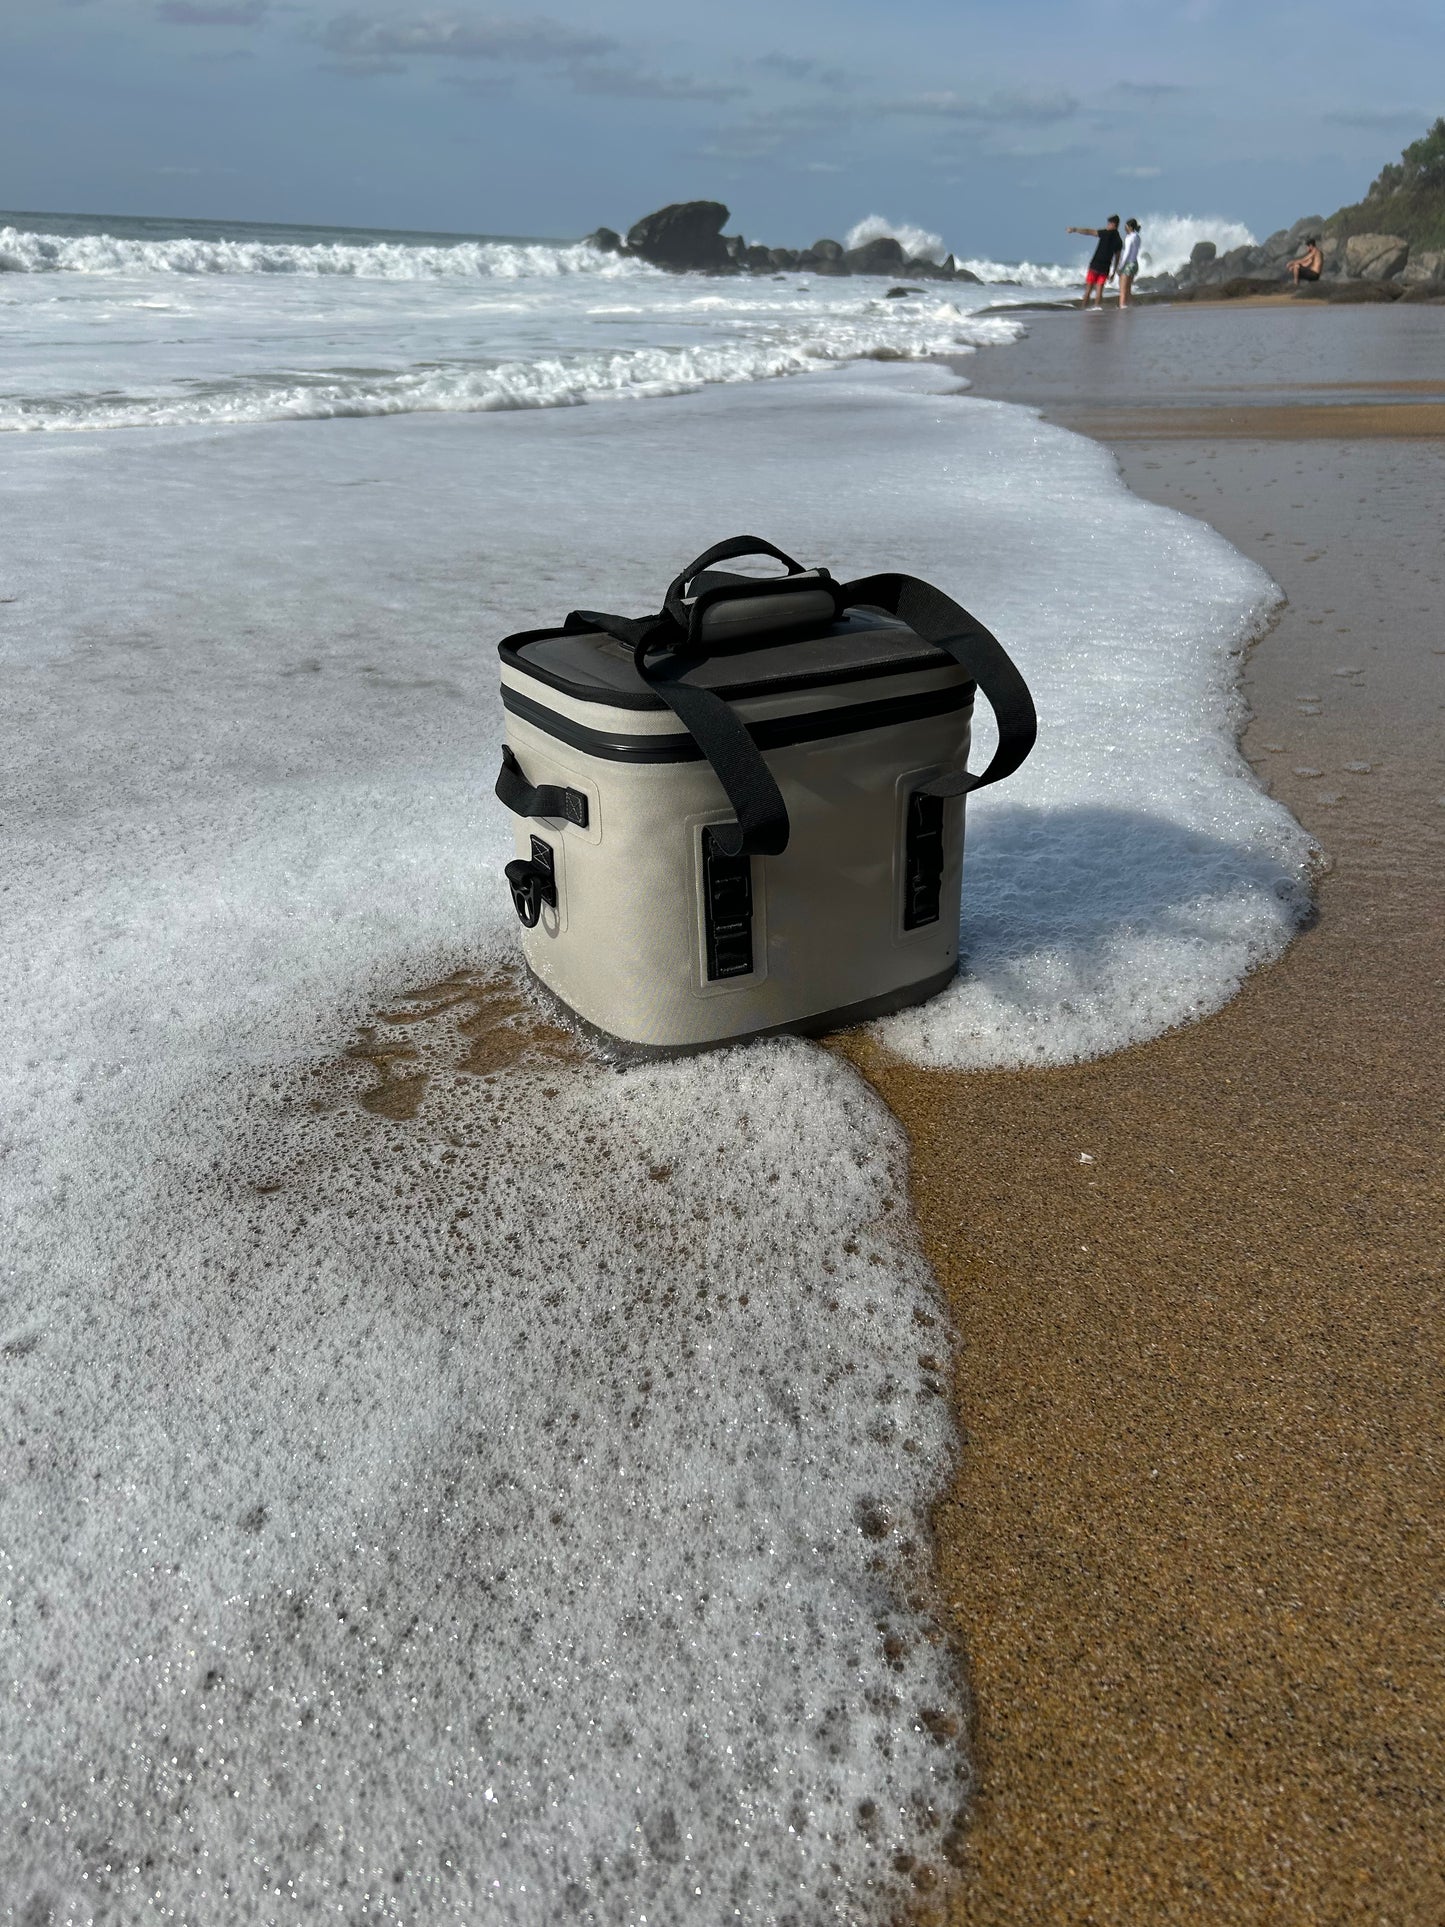 COOTER COOLER WITH SPEAKER